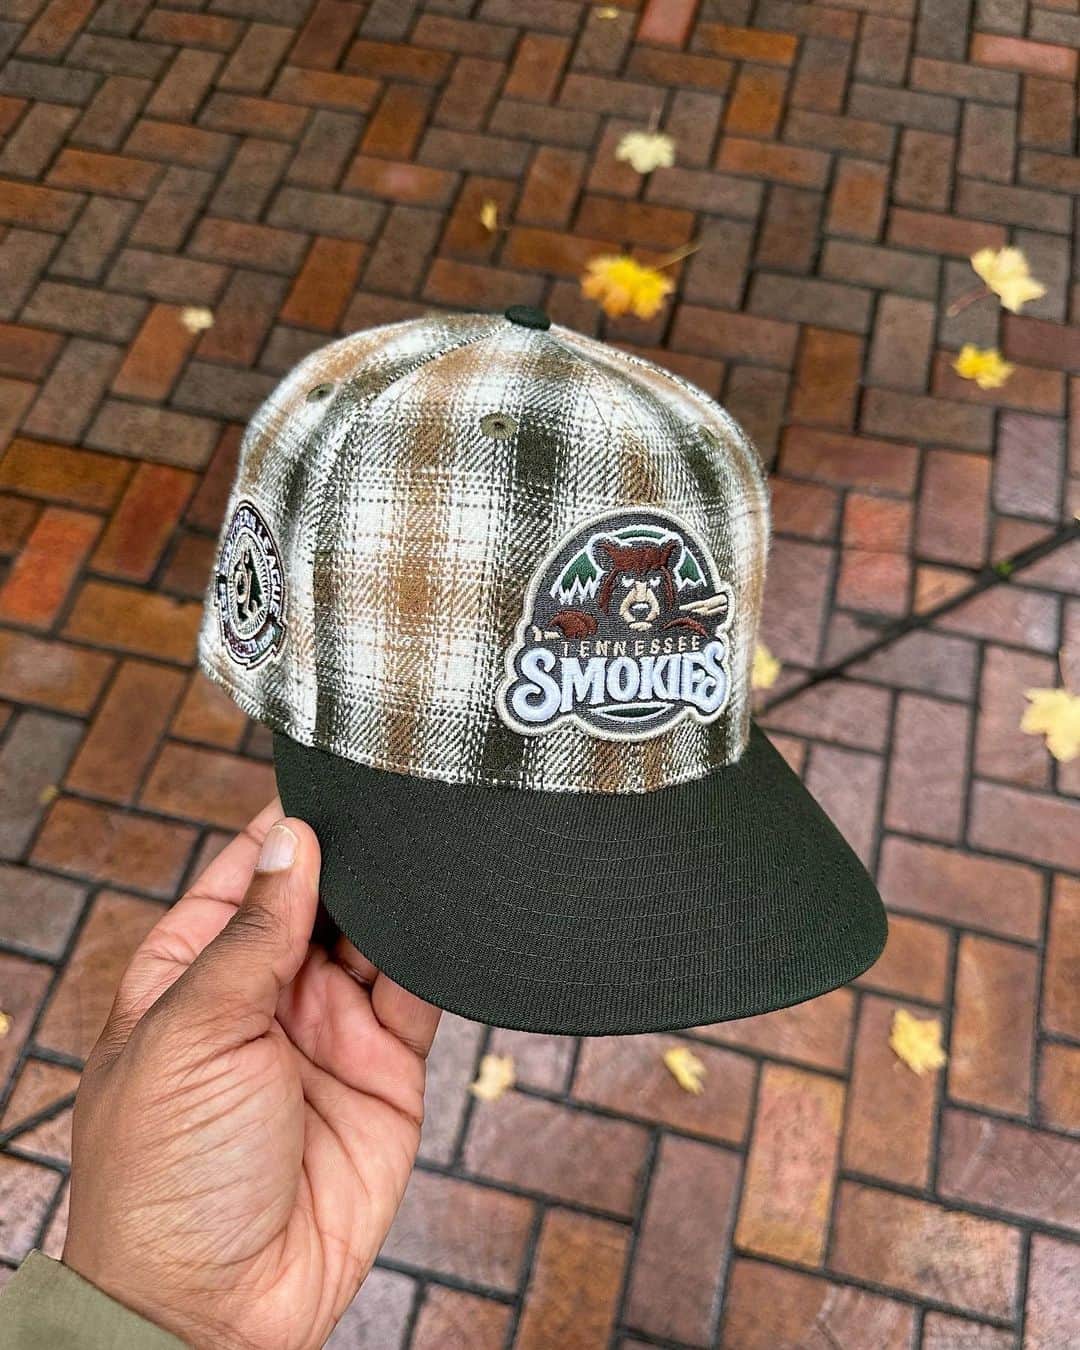 Mr. Tyのインスタグラム：「My plaid @smokiesbaseball will be available Weds 12/13 @ 11am CST via stash1250.com. Sz 7-8 will be available, $50 bucks. Made in China. In store pickup at purchase will be available.  This one features a nice dark green visor to complement the plaid crown. The plaid was giving me outdoor Eddie Bauer vibes, so I went with the Smokies. The Smokies logo has pops of metallic silver and metallic black pearl. Grey UV, Southern League side patch, black sweatband, and a raised MILB batterman in the rear.  This is the last print/pattern for the year, but there are a few more on tap for the top of the year!  #capson #fittedcap #fittedfiend #teamfitted #thatfittedmean #stayfitted #59fifty #milb #igfittedcommunity #myfitteds #fittednation #neweracap #fittedfam #tennesseesmokies #fittedsnob #stayfitted #newera #smokies #minorleaguemonday」